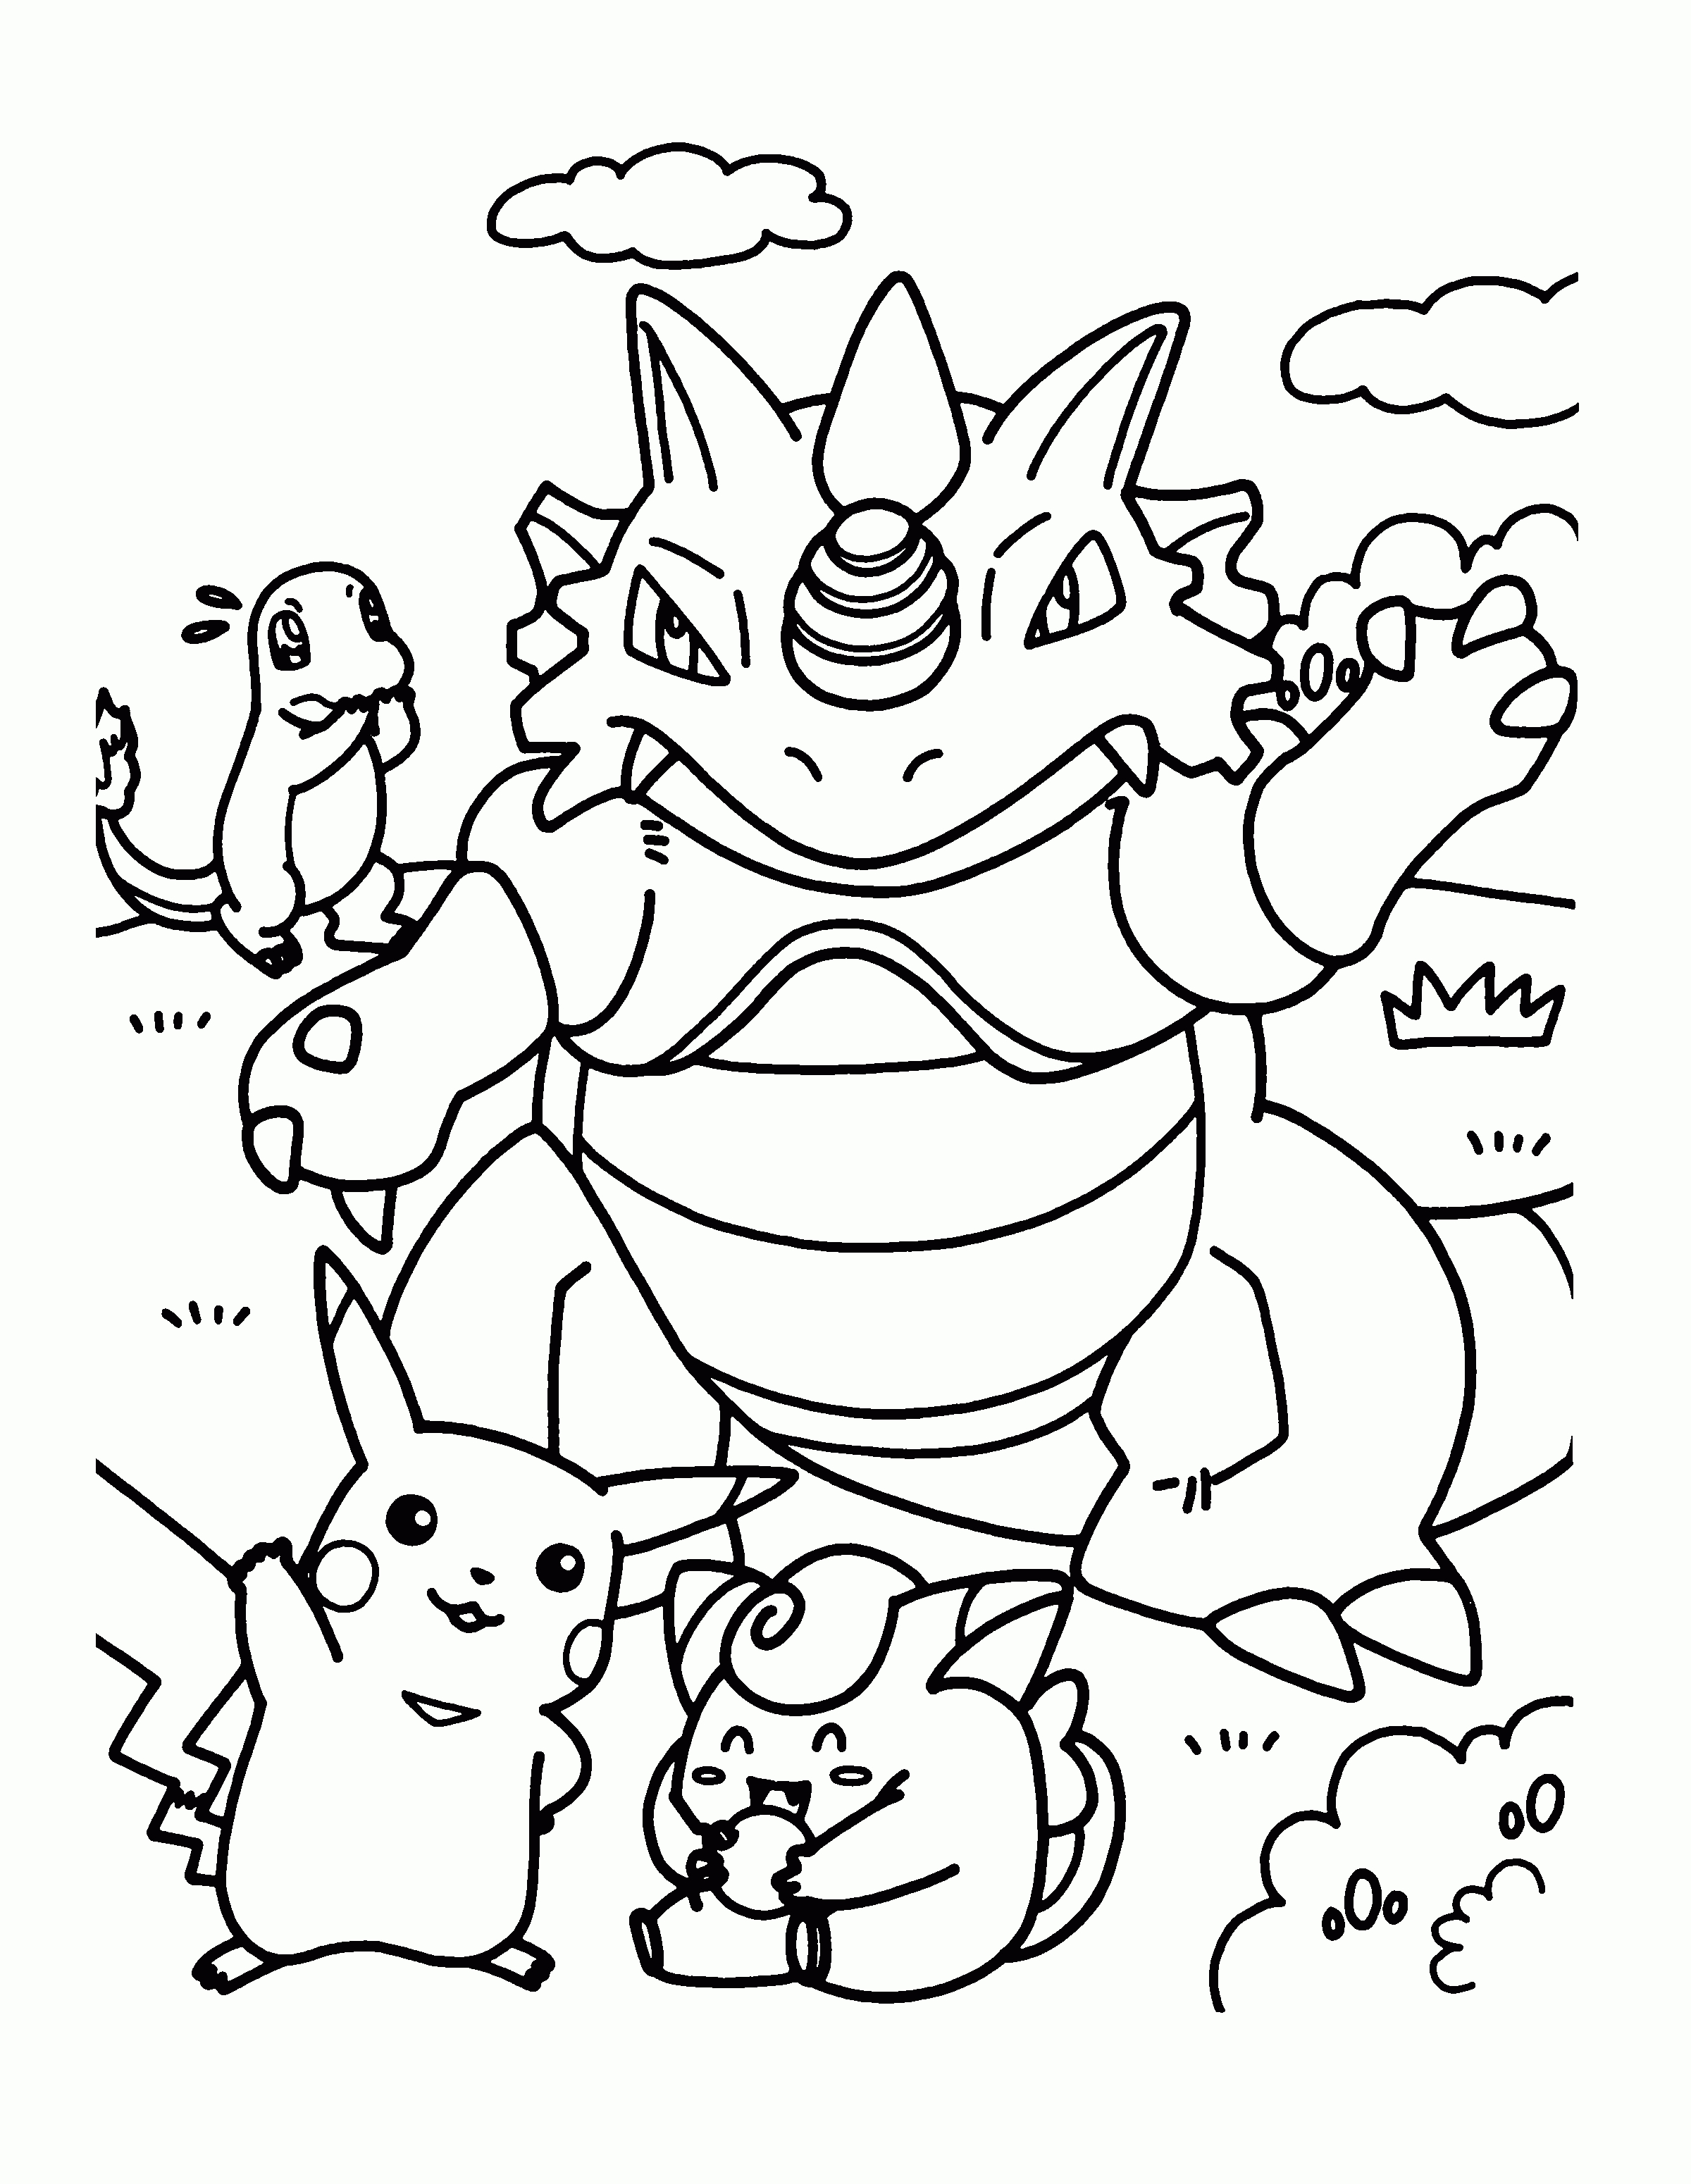 Pokemon Coloring Pages. Join Your Favorite Pokemon On An Adventure! - Free Printable Pokemon Coloring Pages